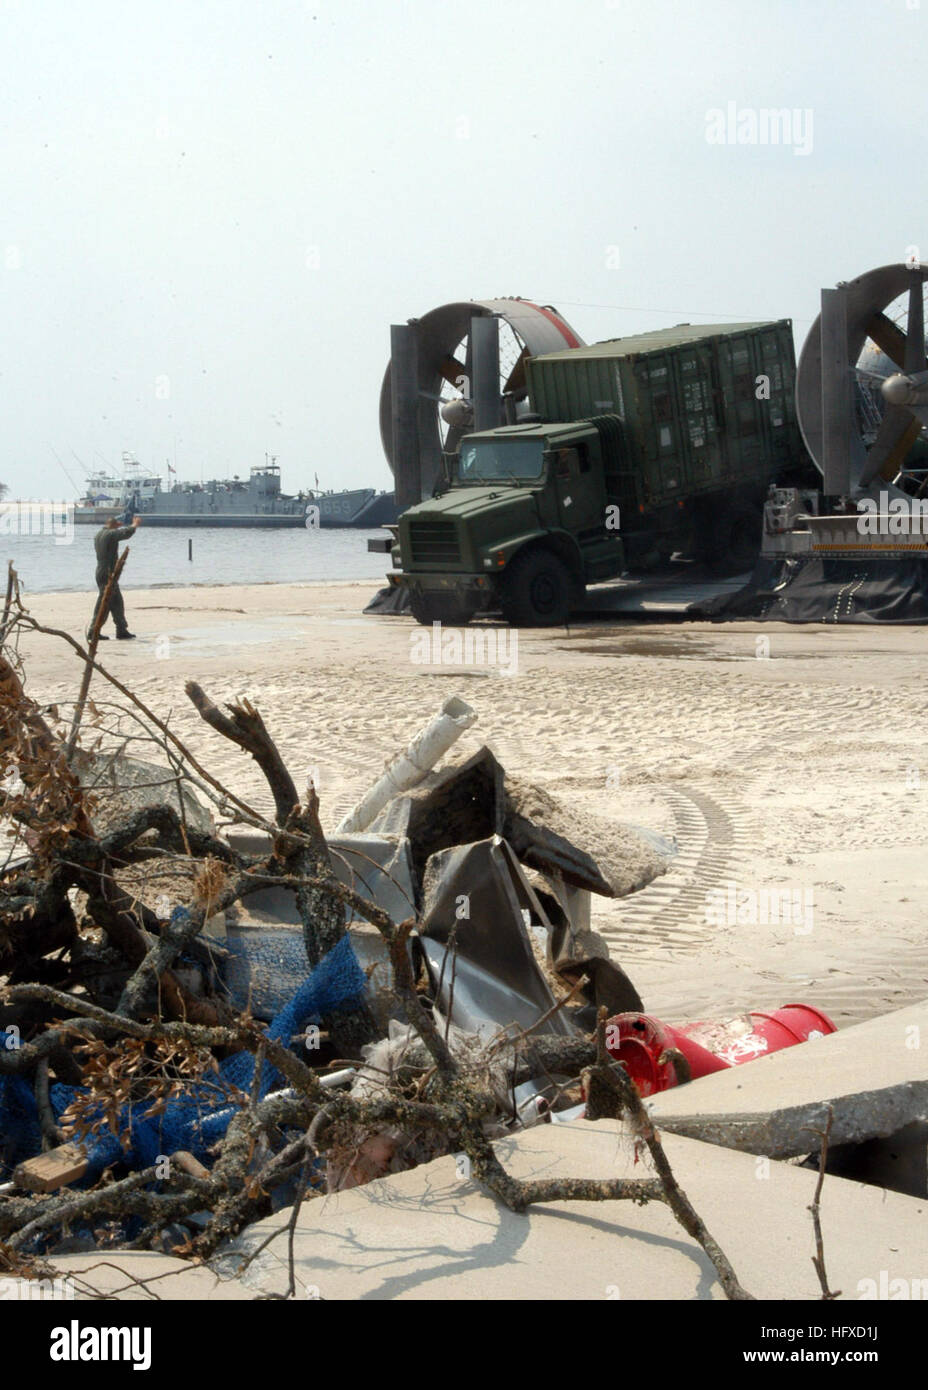 050904-N-7638K-021 Biloxi, Miss. (Sept. 4, 2005) Ð Heavy equipment from the Amphibious Construction Battalion Two (ACB-2) arrives on the shores of Biloxi, Miss., to render assistance to Hurricane Katrina survivors. The equipment was transported via Landing Craft, Air Cushion (LCAC) from the amphibious assault ship USS Iwo Jima (LHD 7). The Navy's involvement in the Hurricane Katrina humanitarian assistance operations is led by the Federal Emergency Management Agency (FEMA), in conjunction with the Department of Defense. U.S. Navy photo by Lithographer 1st Class Edward S. Kessler (RELEASED) US  Stock Photo